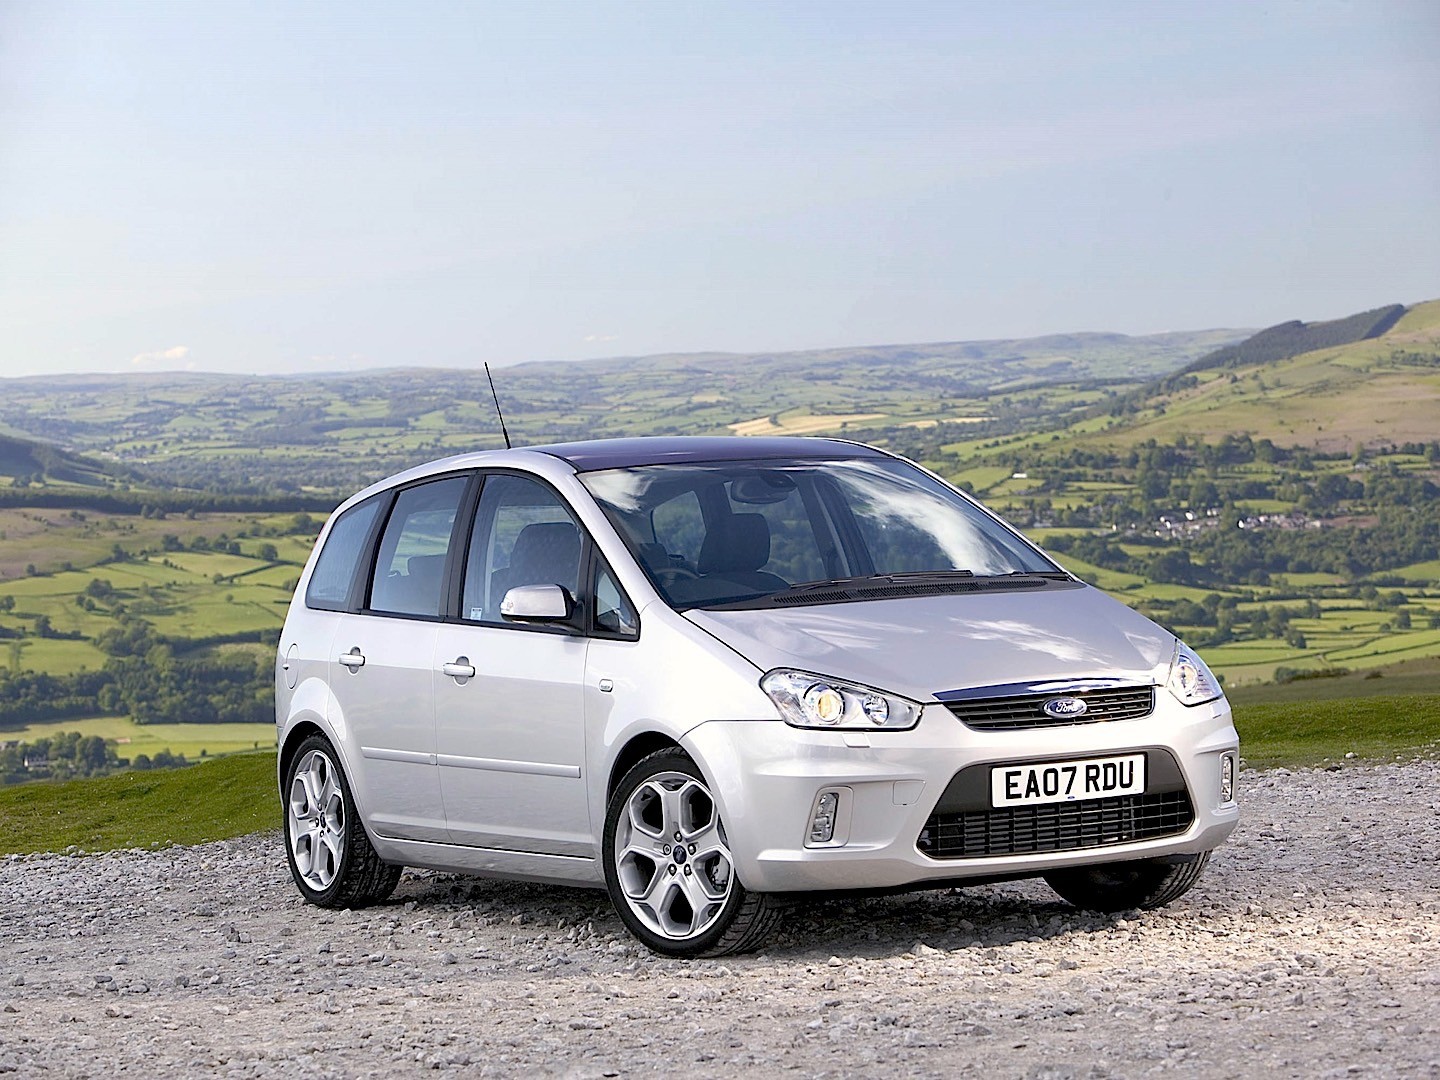 Ford C Max I Restyling 07 10 Compact Mpv Outstanding Cars